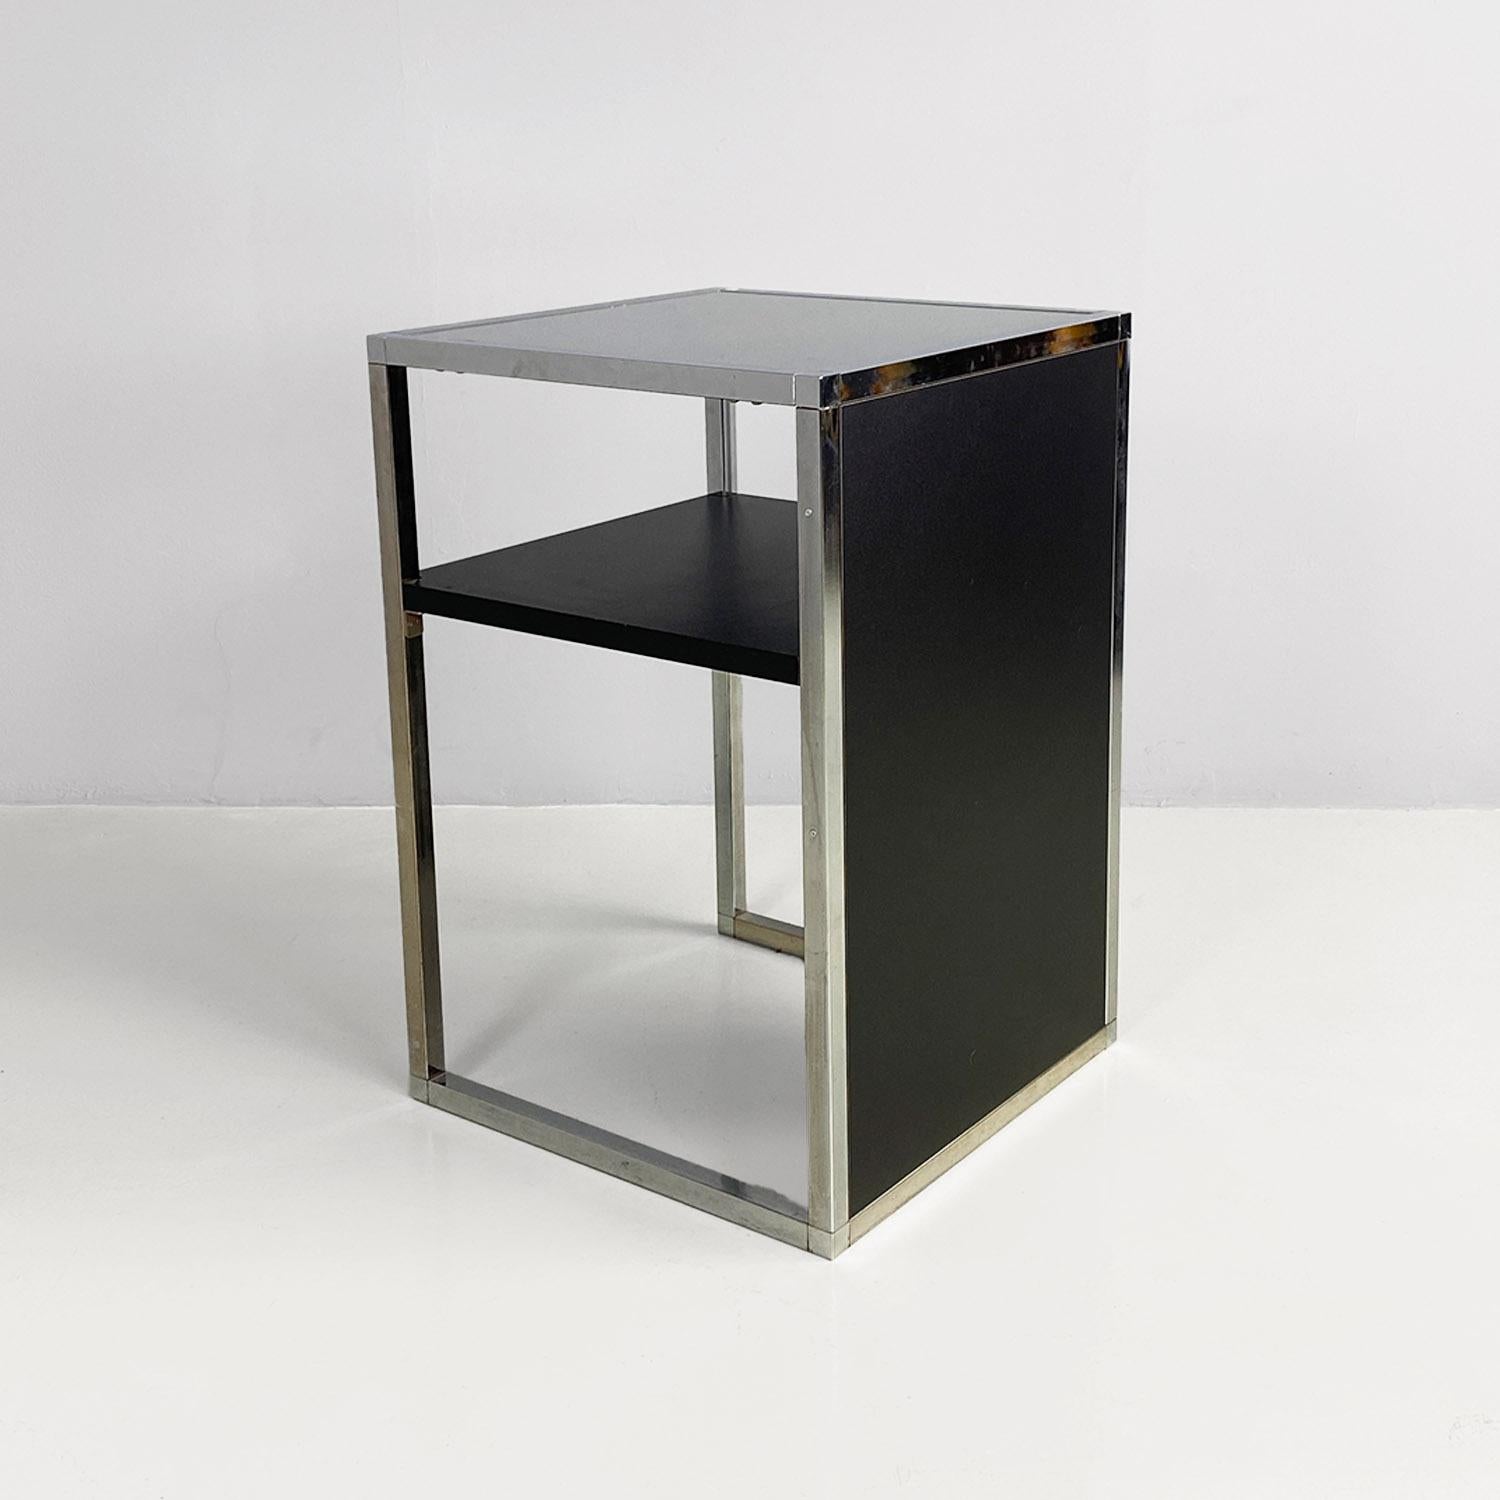 Steel Italian modern chromed steel, wood and glass table for stereo and vinyls, 1990s For Sale